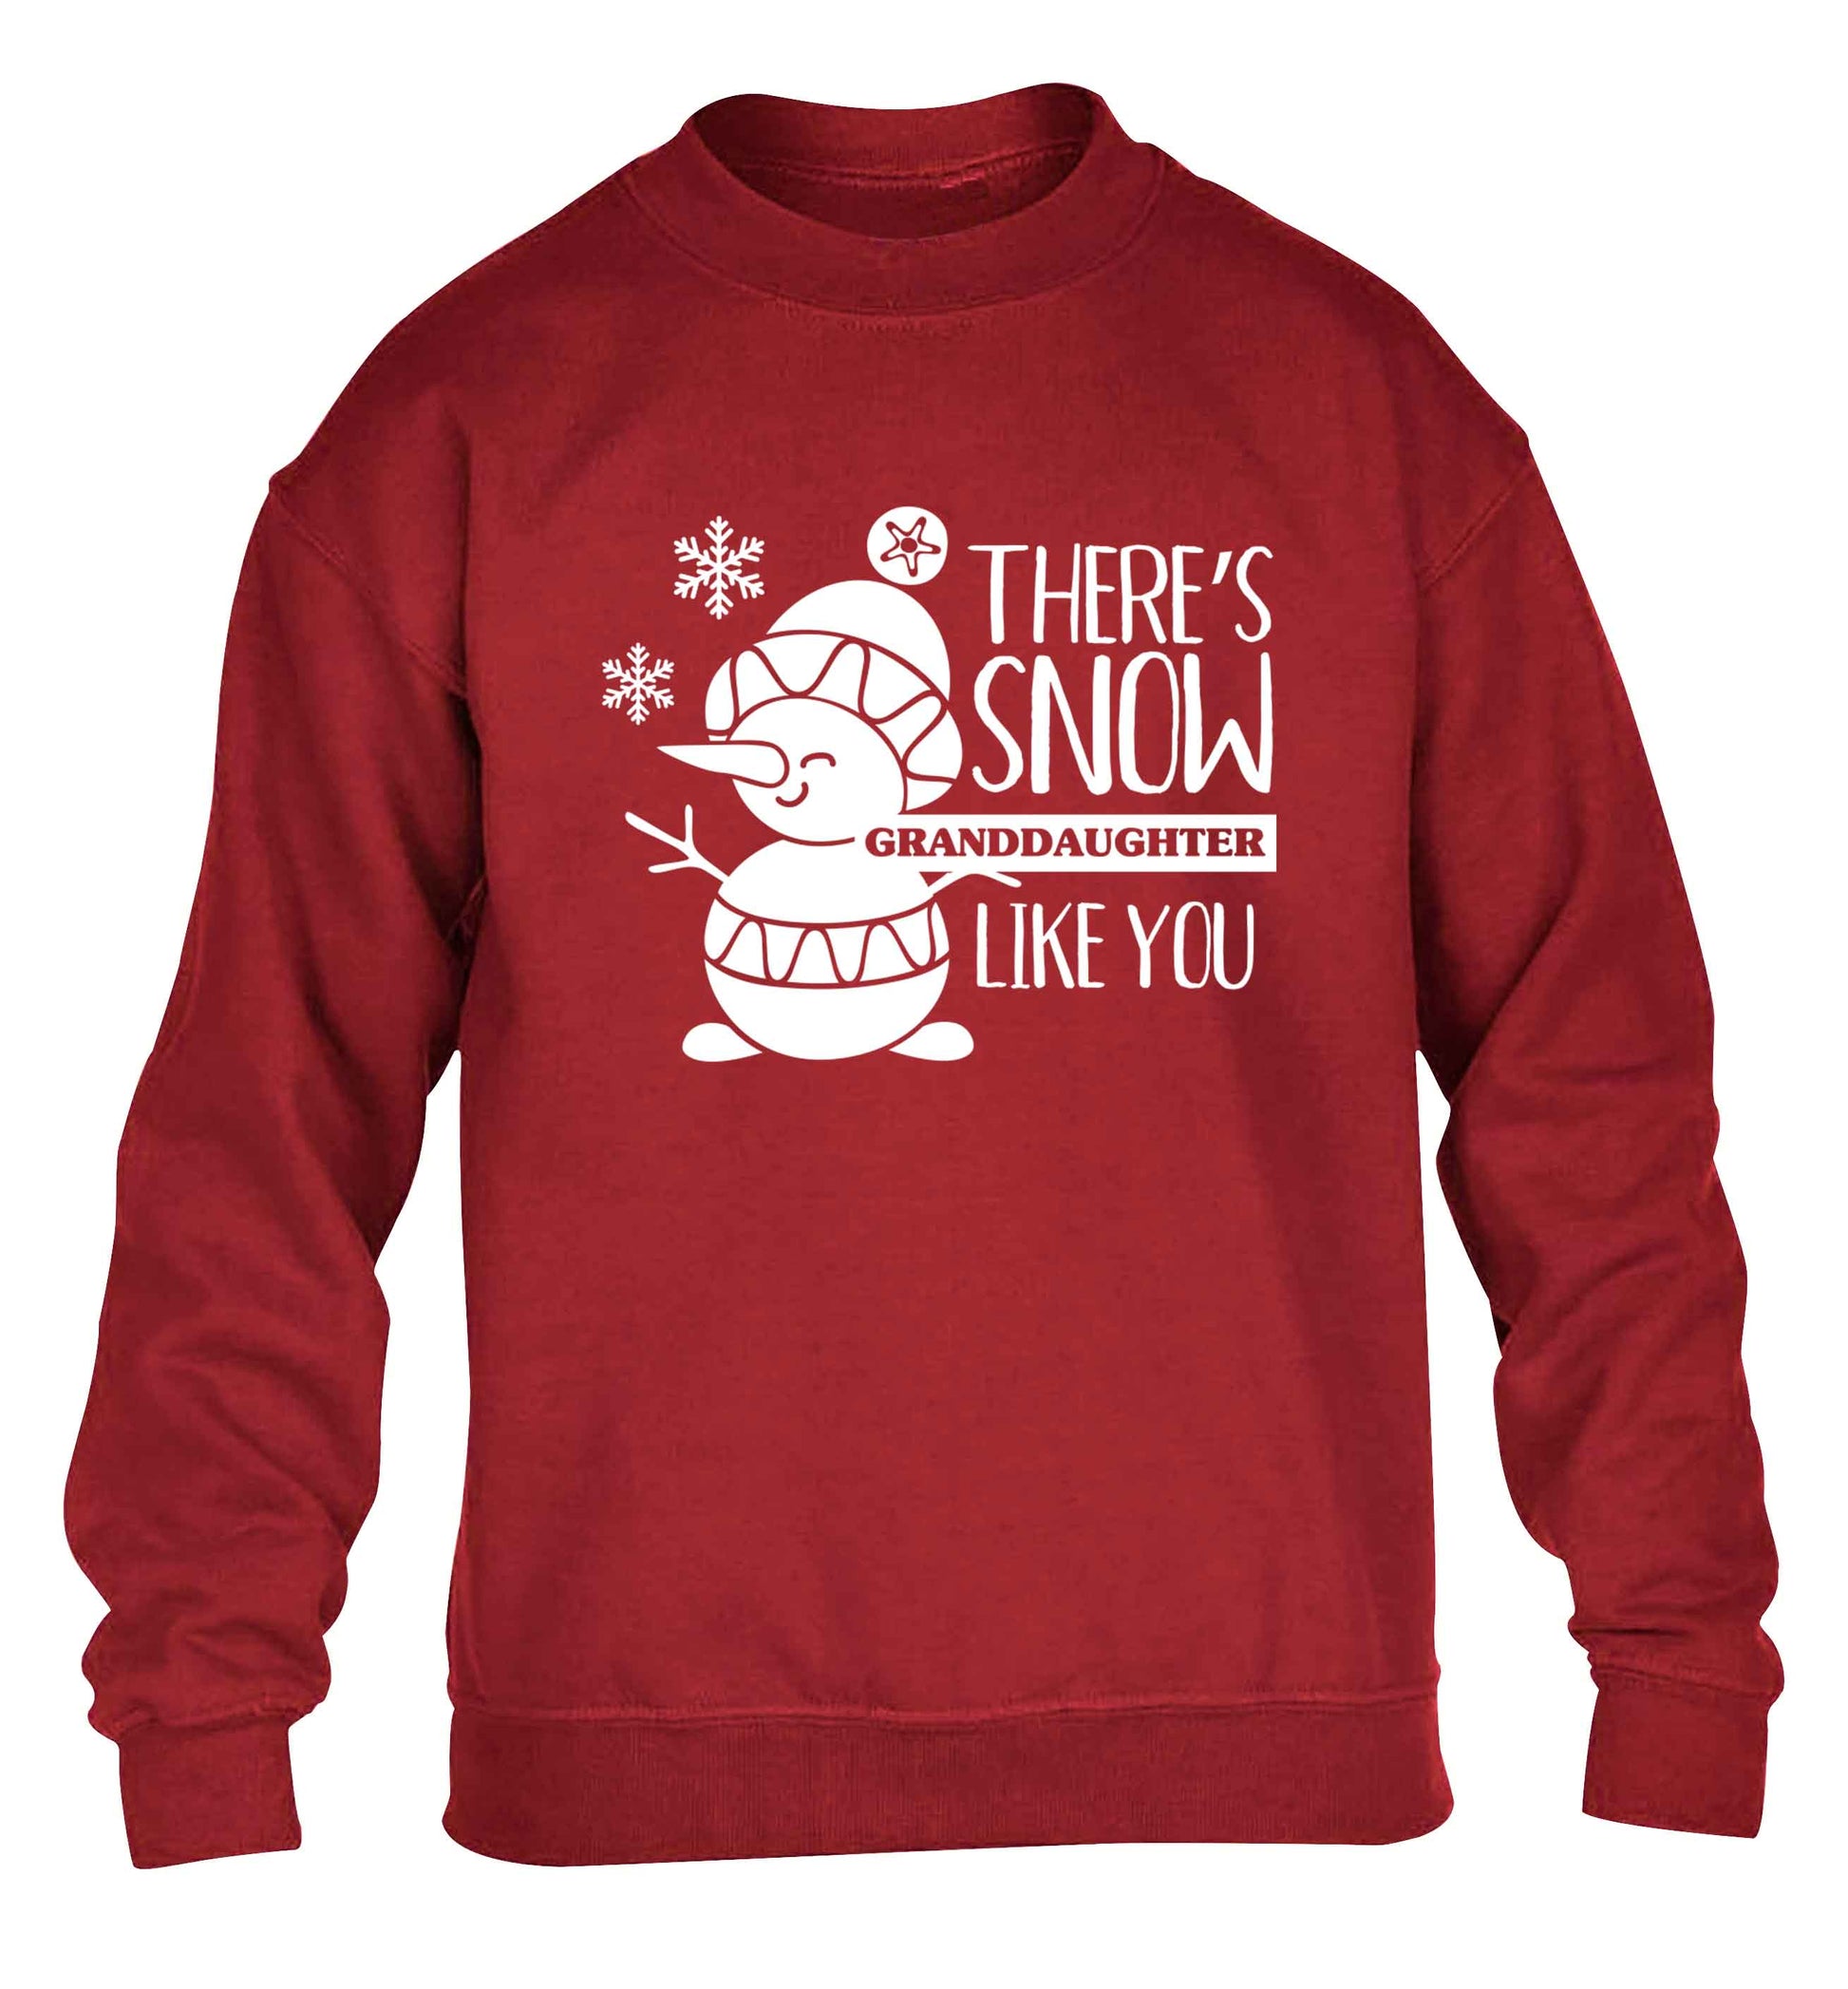 There's snow granddaughter like you children's grey sweater 12-13 Years